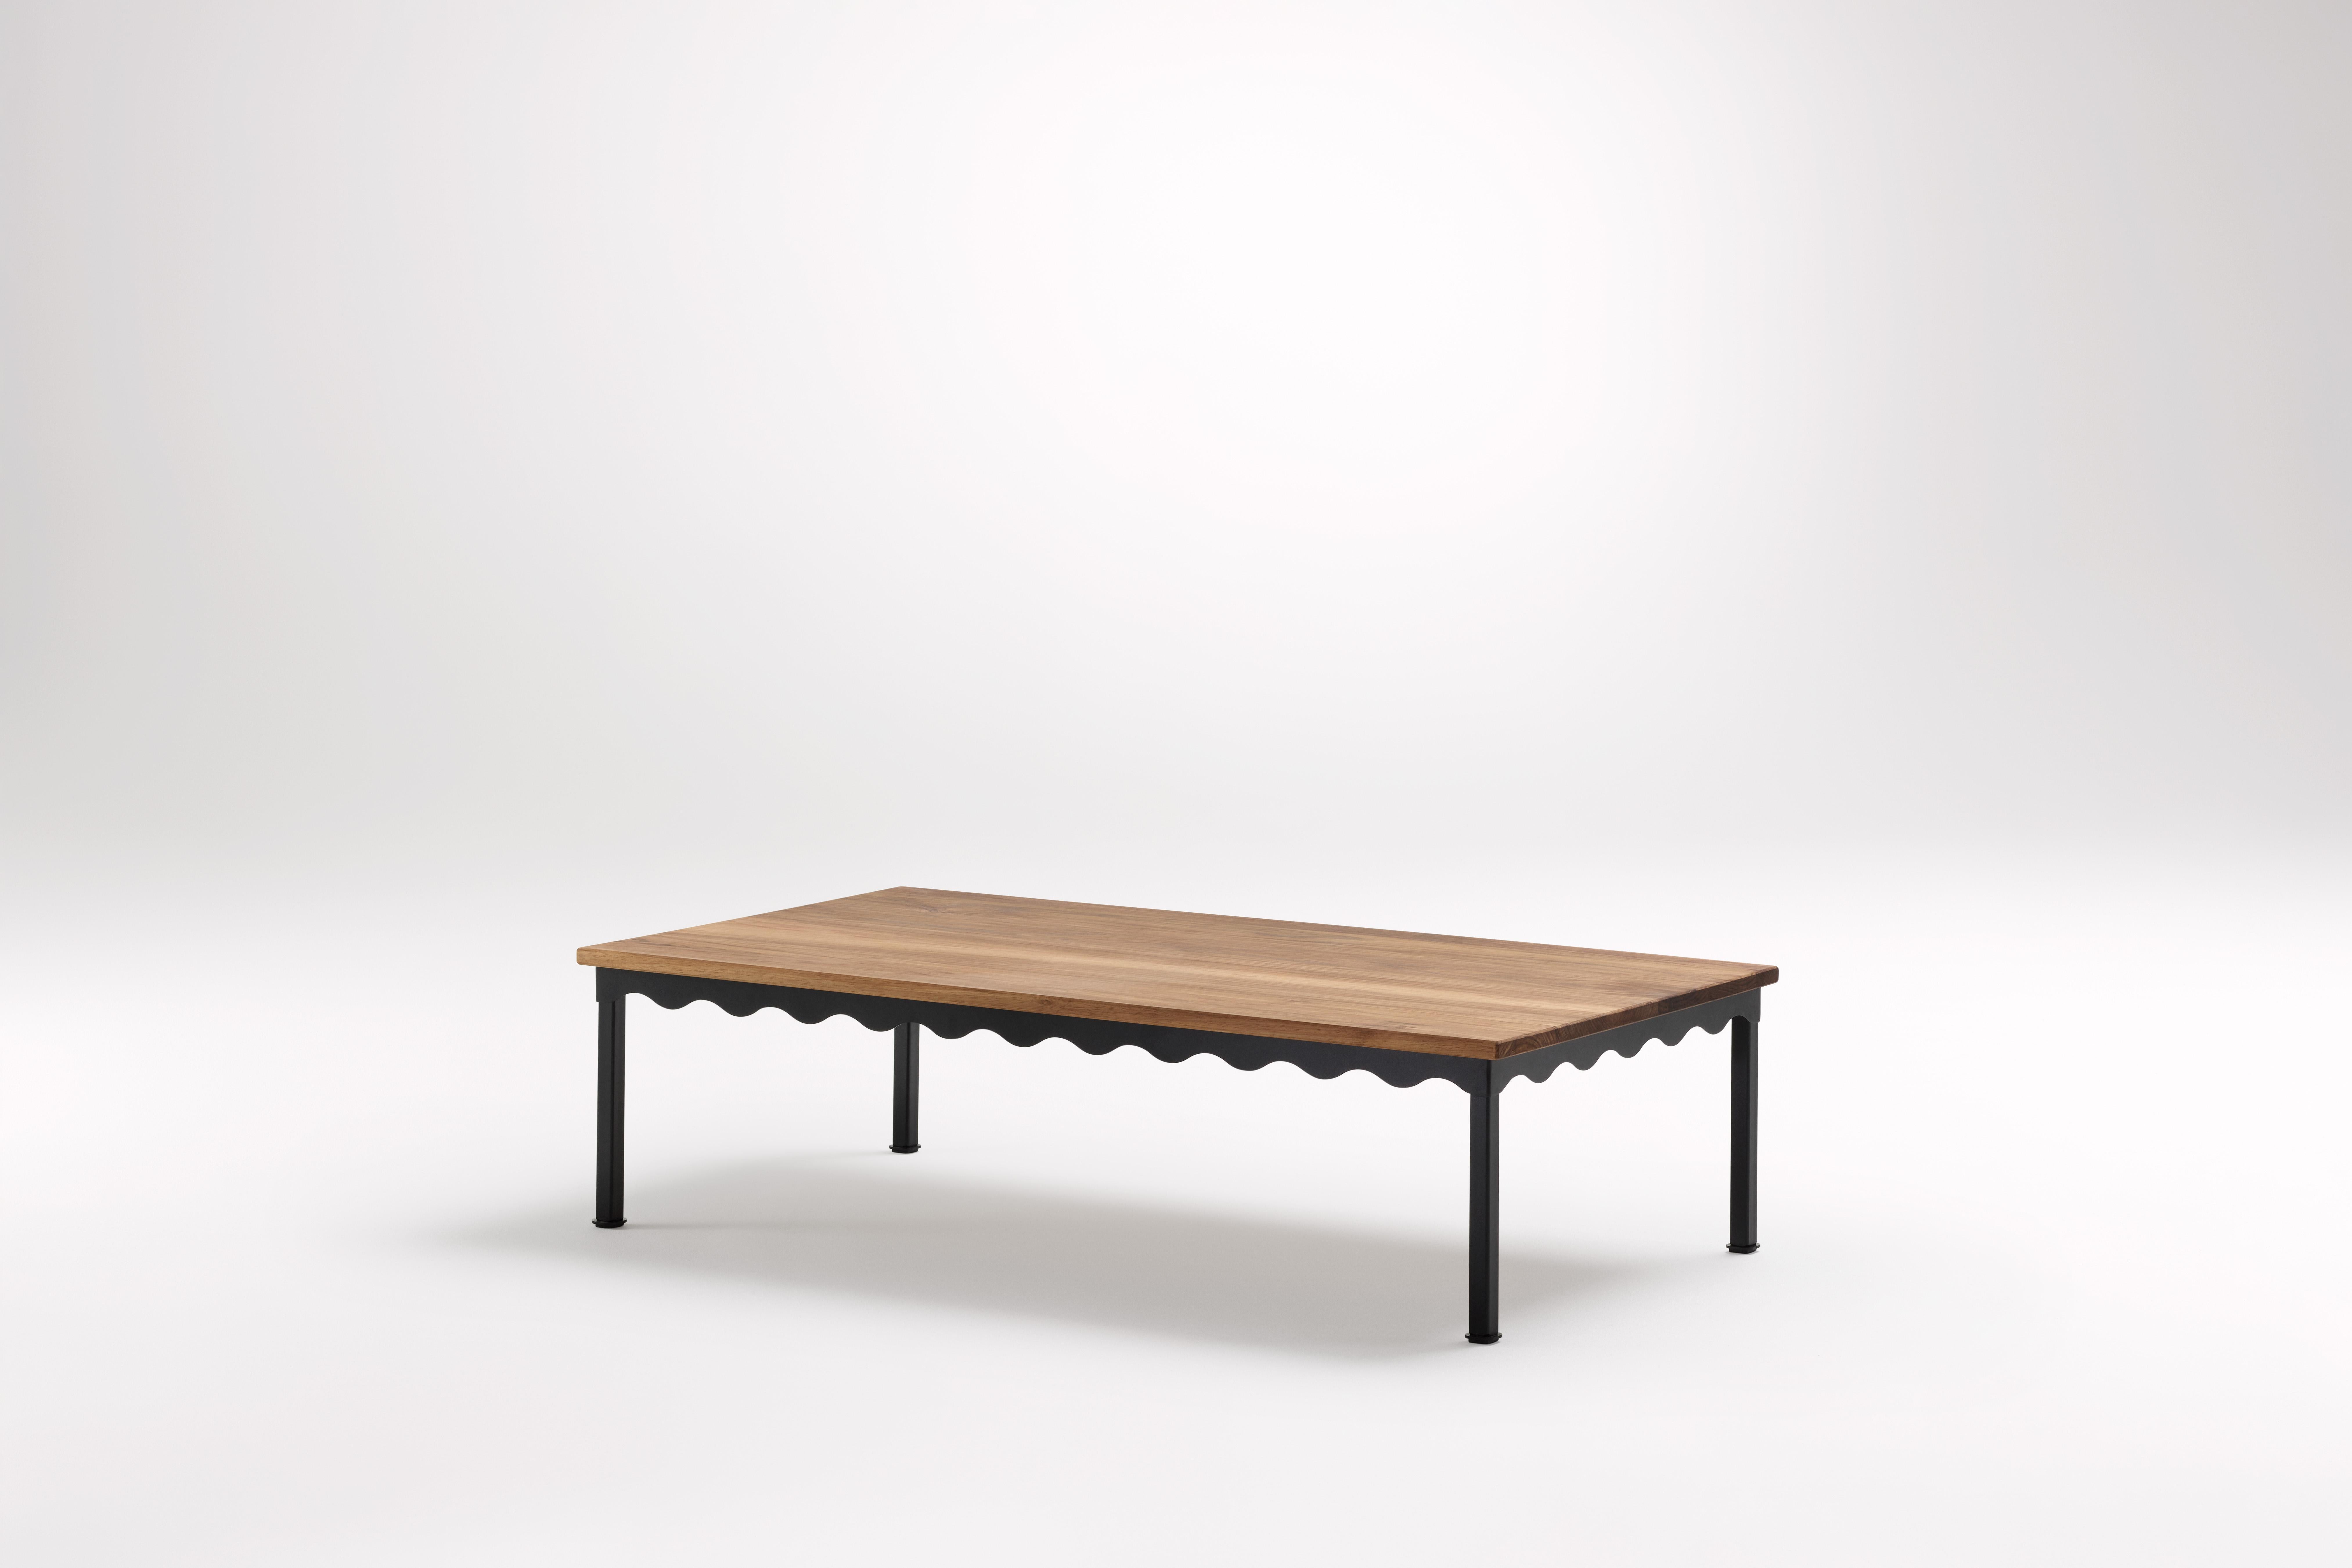 Blackwood Bellini Coffee Table by Coco Flip
Dimensions: D 126 x W 66 x H 32 cm
Materials: Timber / Stone tops, Powder-coated steel frame. 
Weight: 20kg
Frame Finishes: Textura Black.

Coco Flip is a Melbourne based furniture and lighting design